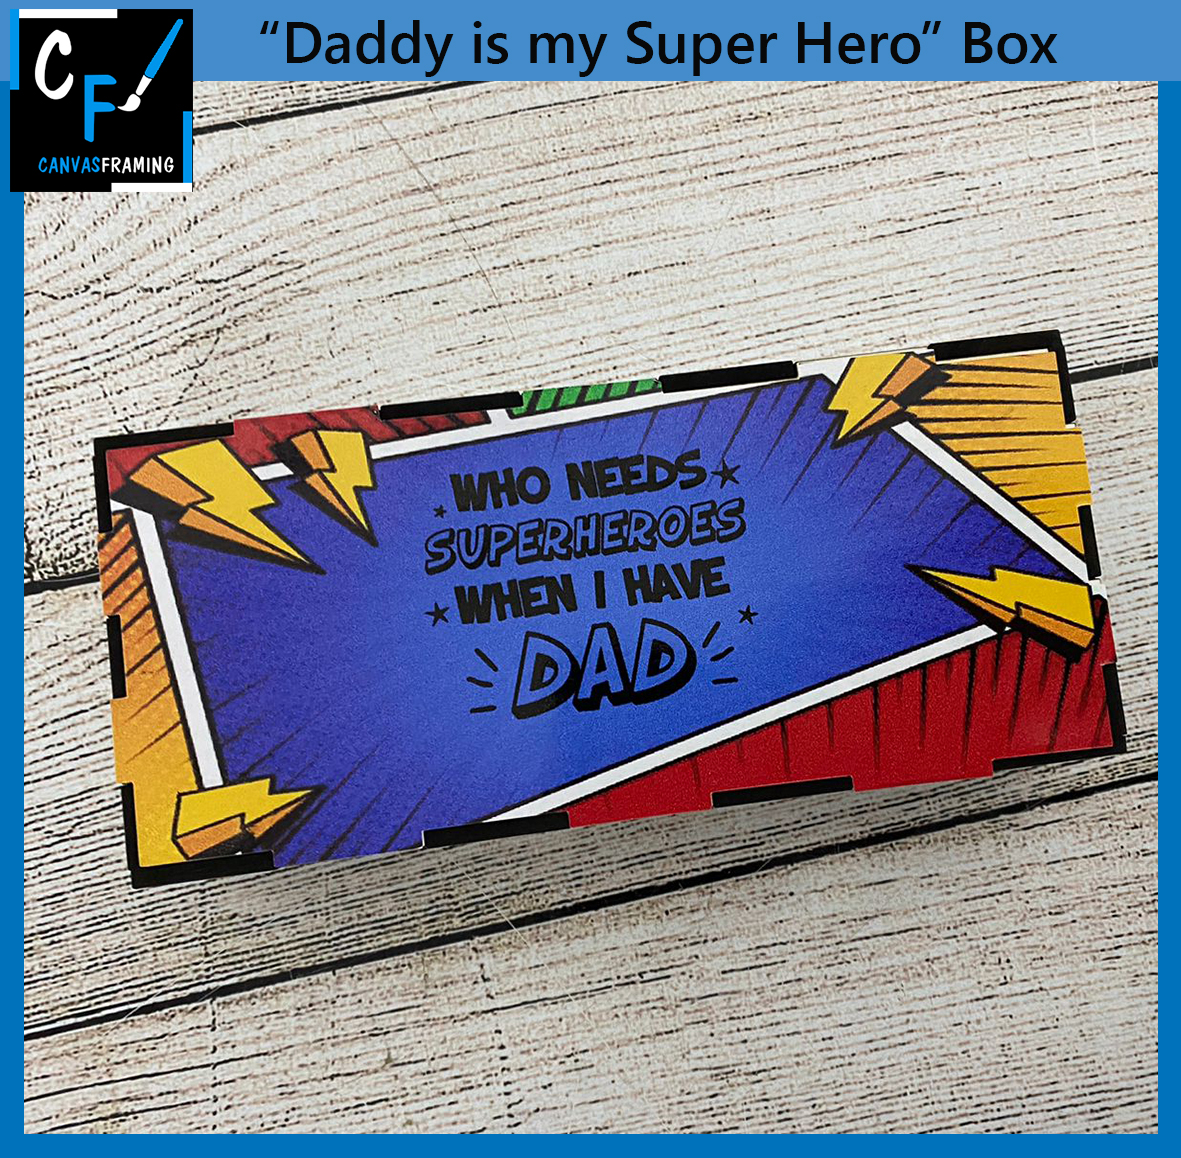 Father's Day Box